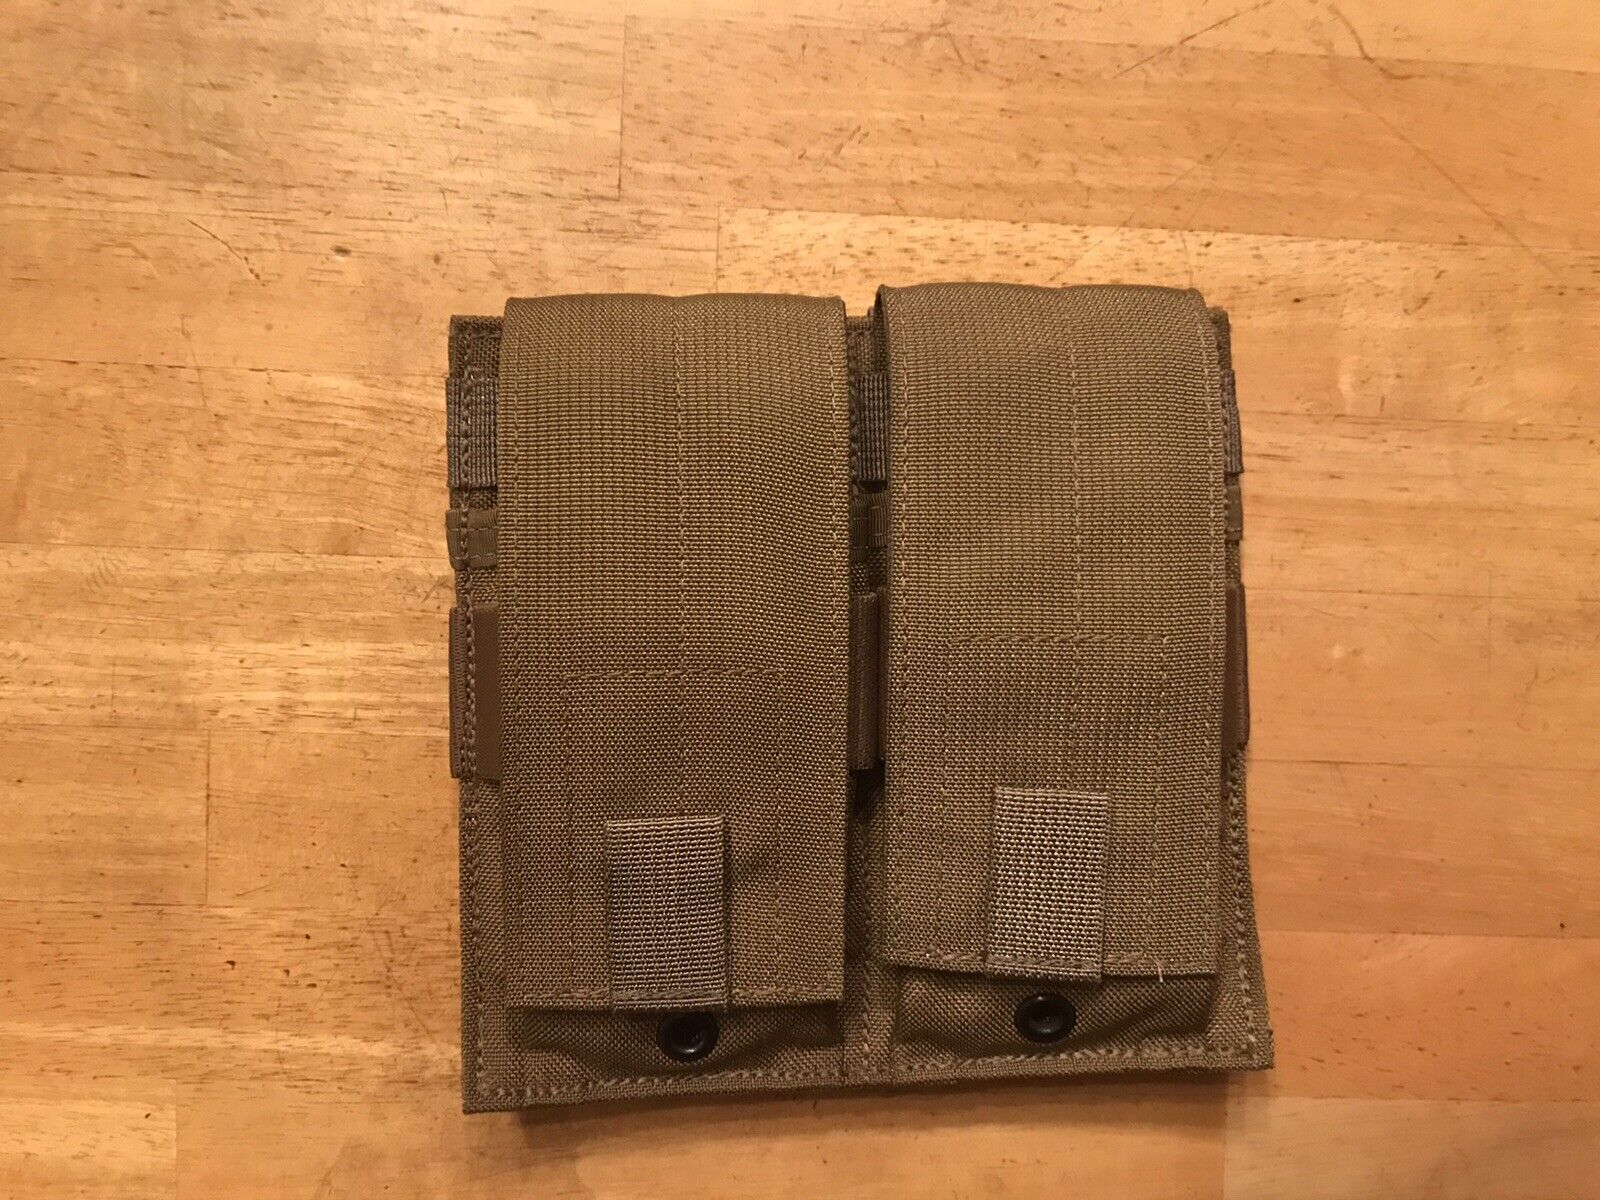 NEW USMC 4 Mag Coyote brown. 4 Magazine ammo pouch molle full battle FBSE USA